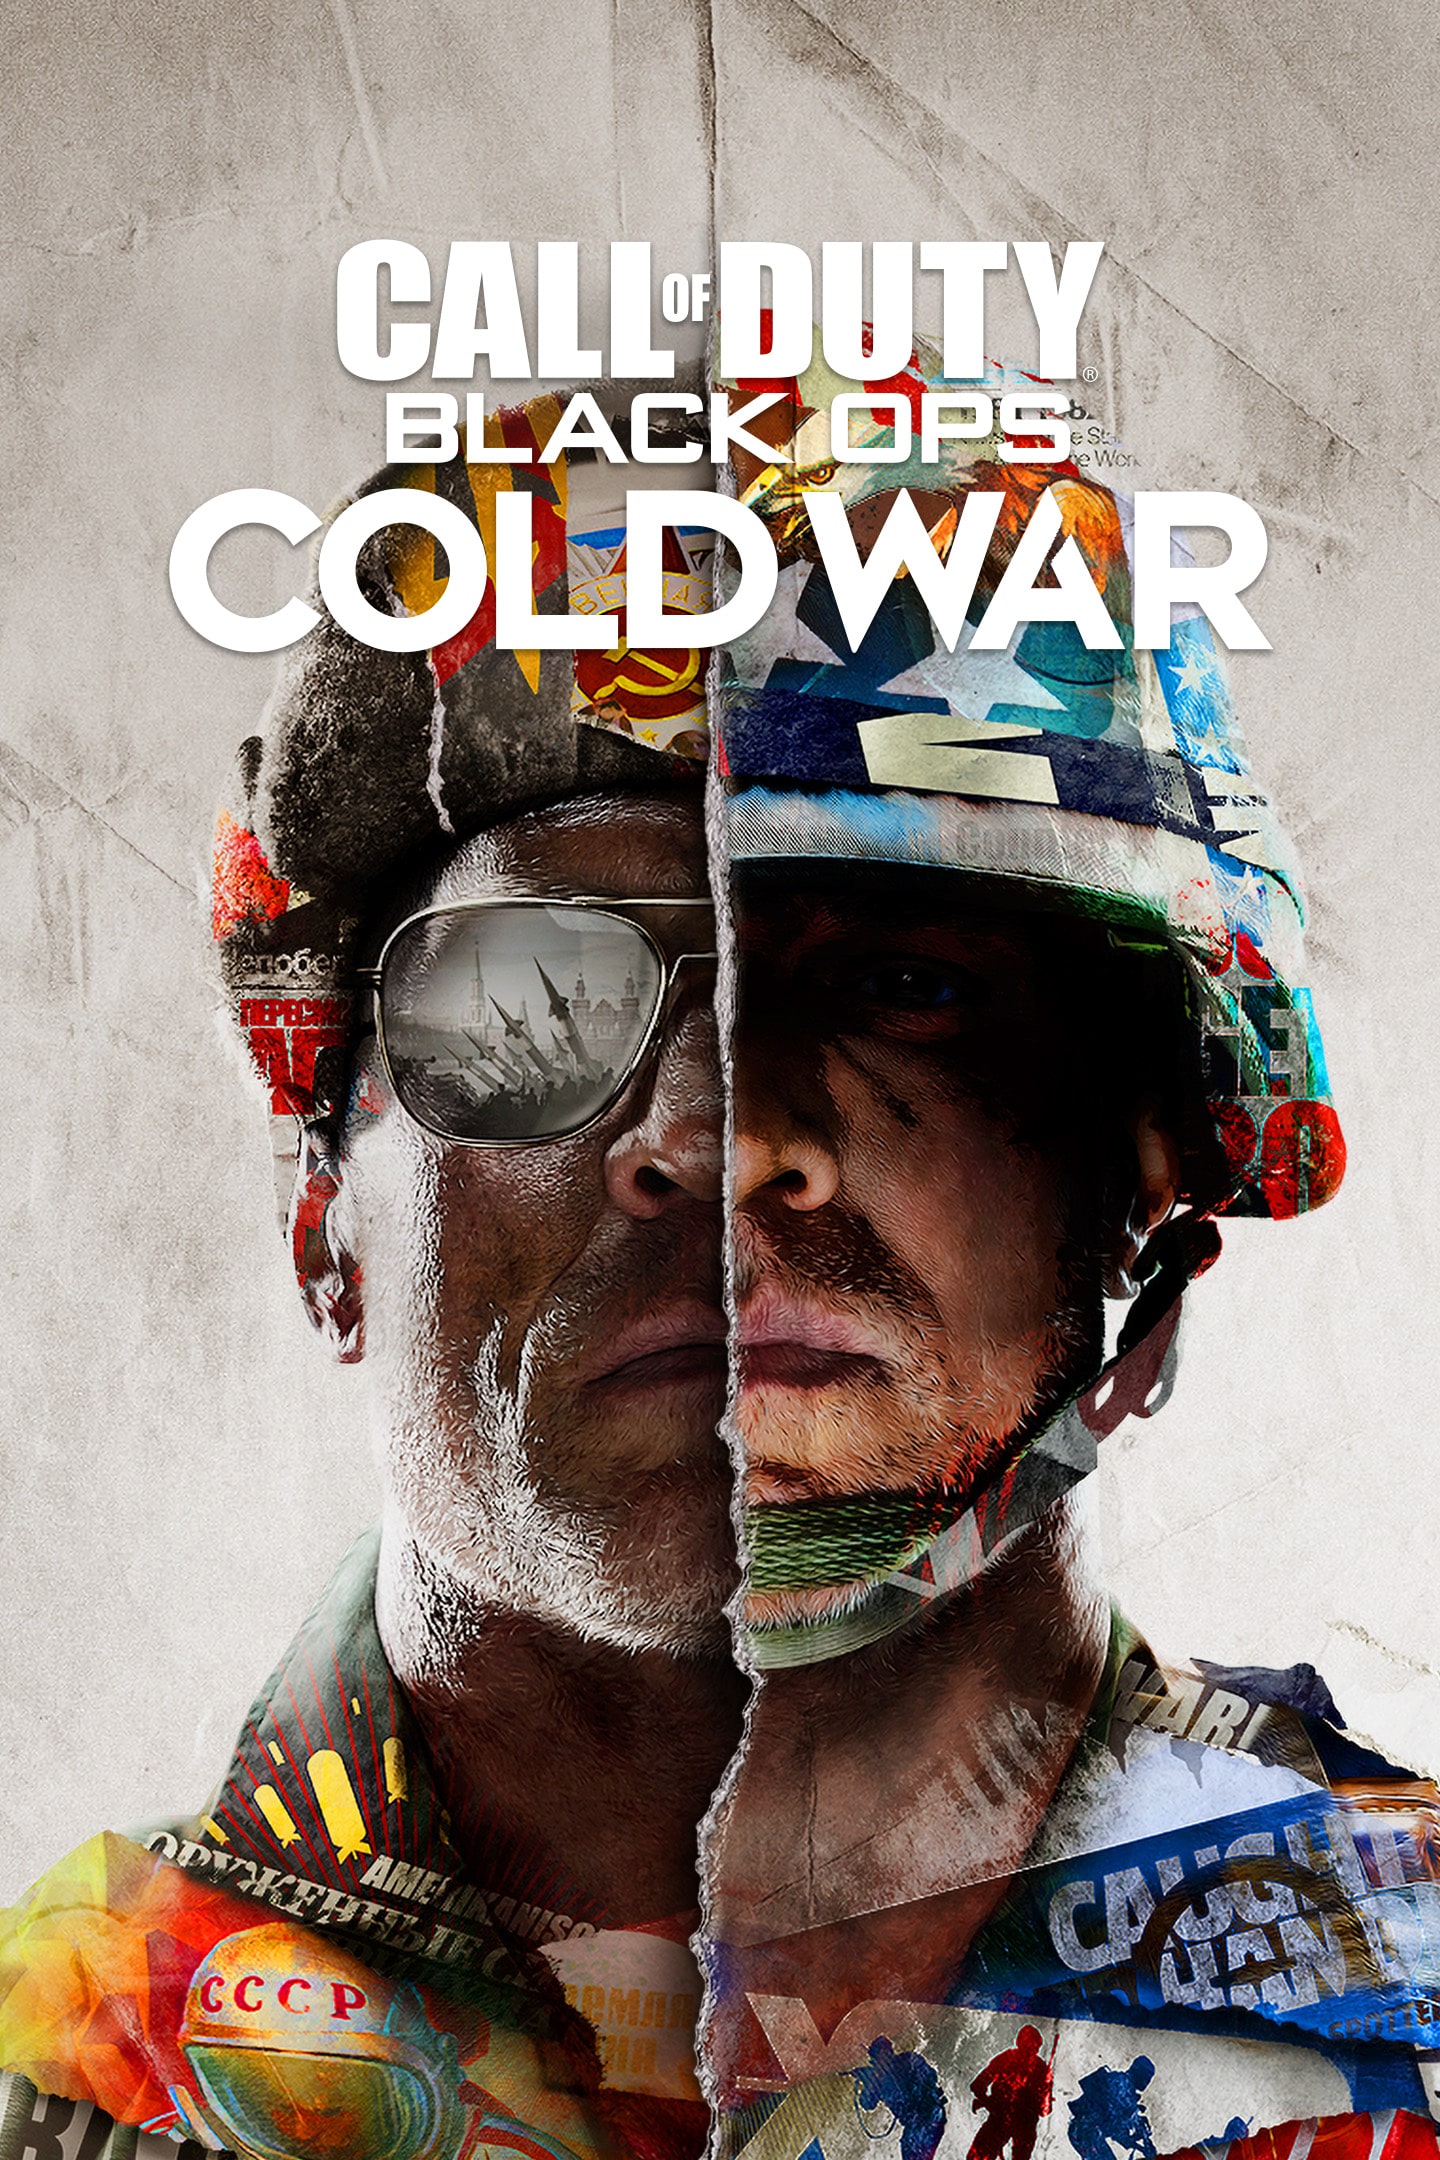 How to play Black Ops Cold War with PlayStation Plus: PS Plus